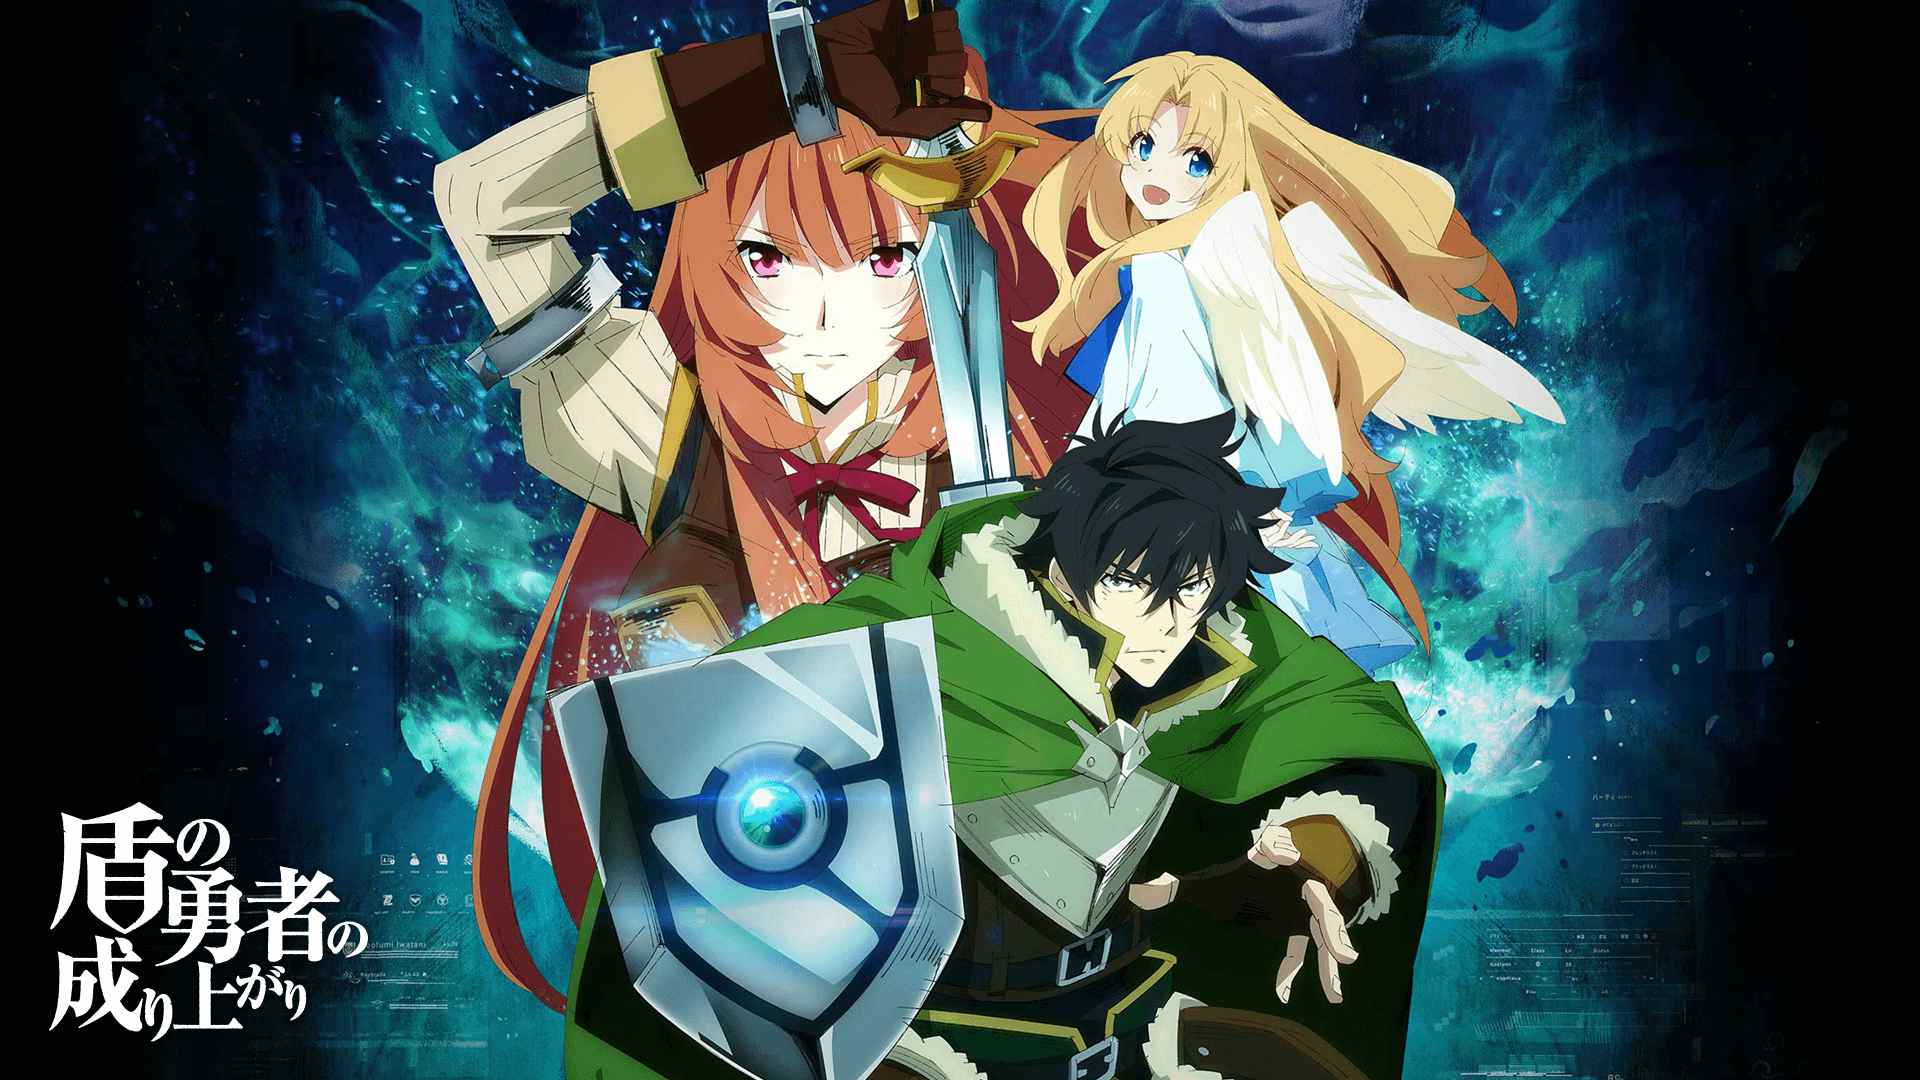 The Rising of the Shield Hero HD Wallpaper. Background Image